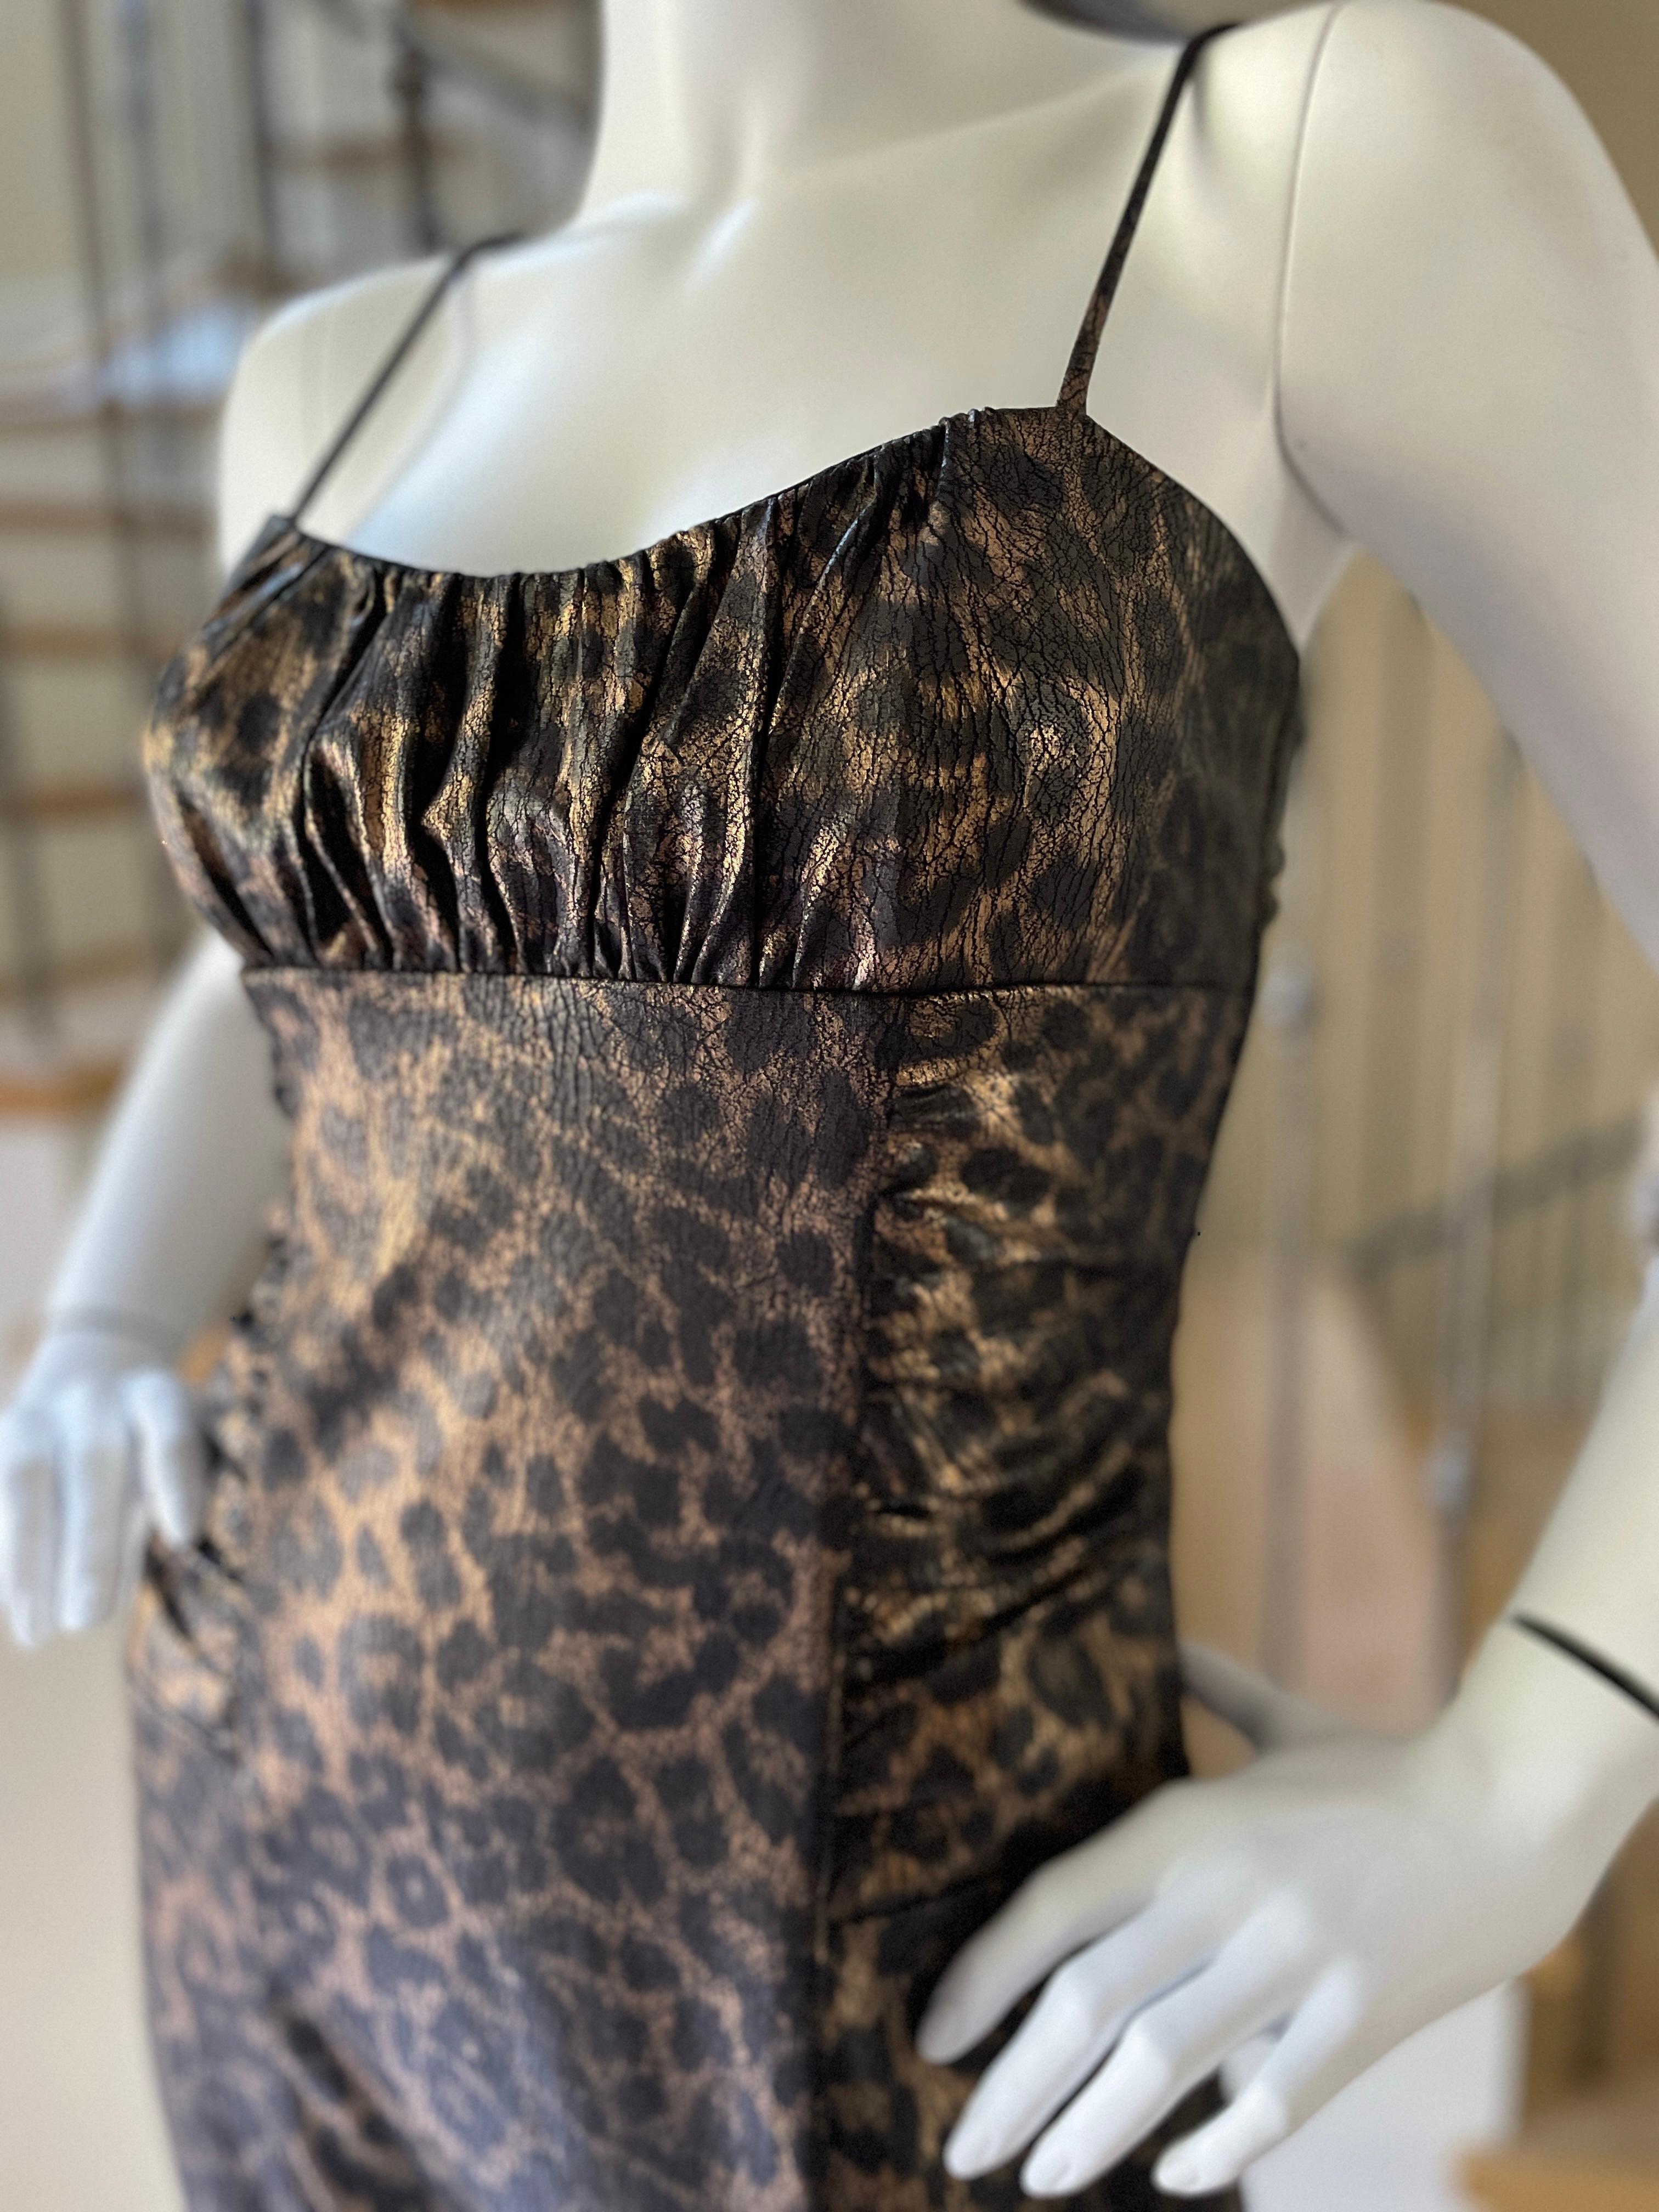 D&G Vintage Metallic Bronze Leopard Print Cocktail Dress by Dolce & Gabbana In Excellent Condition For Sale In Cloverdale, CA